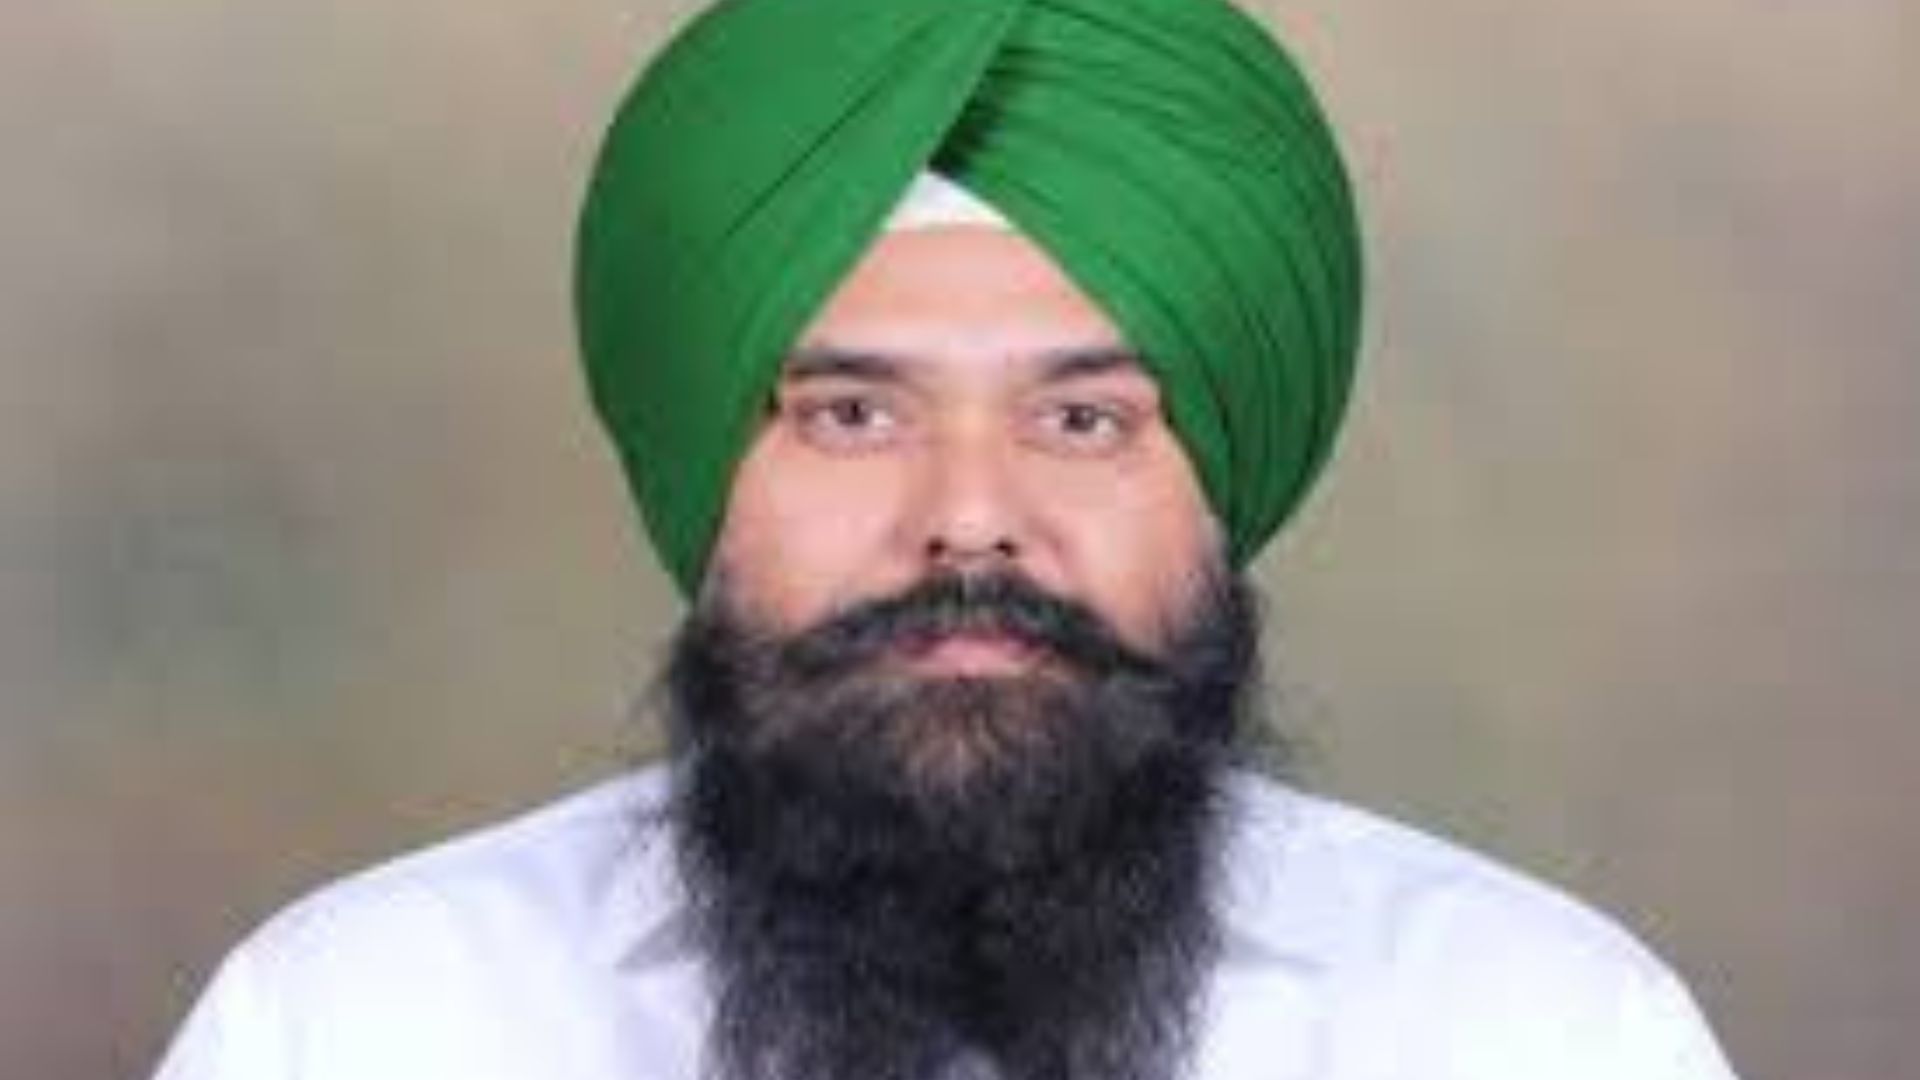 AAP’s Malvinder Singh Kang Vows to Uphold Party’s Public Service Principles in Lok Sabha 2024 Candidacy